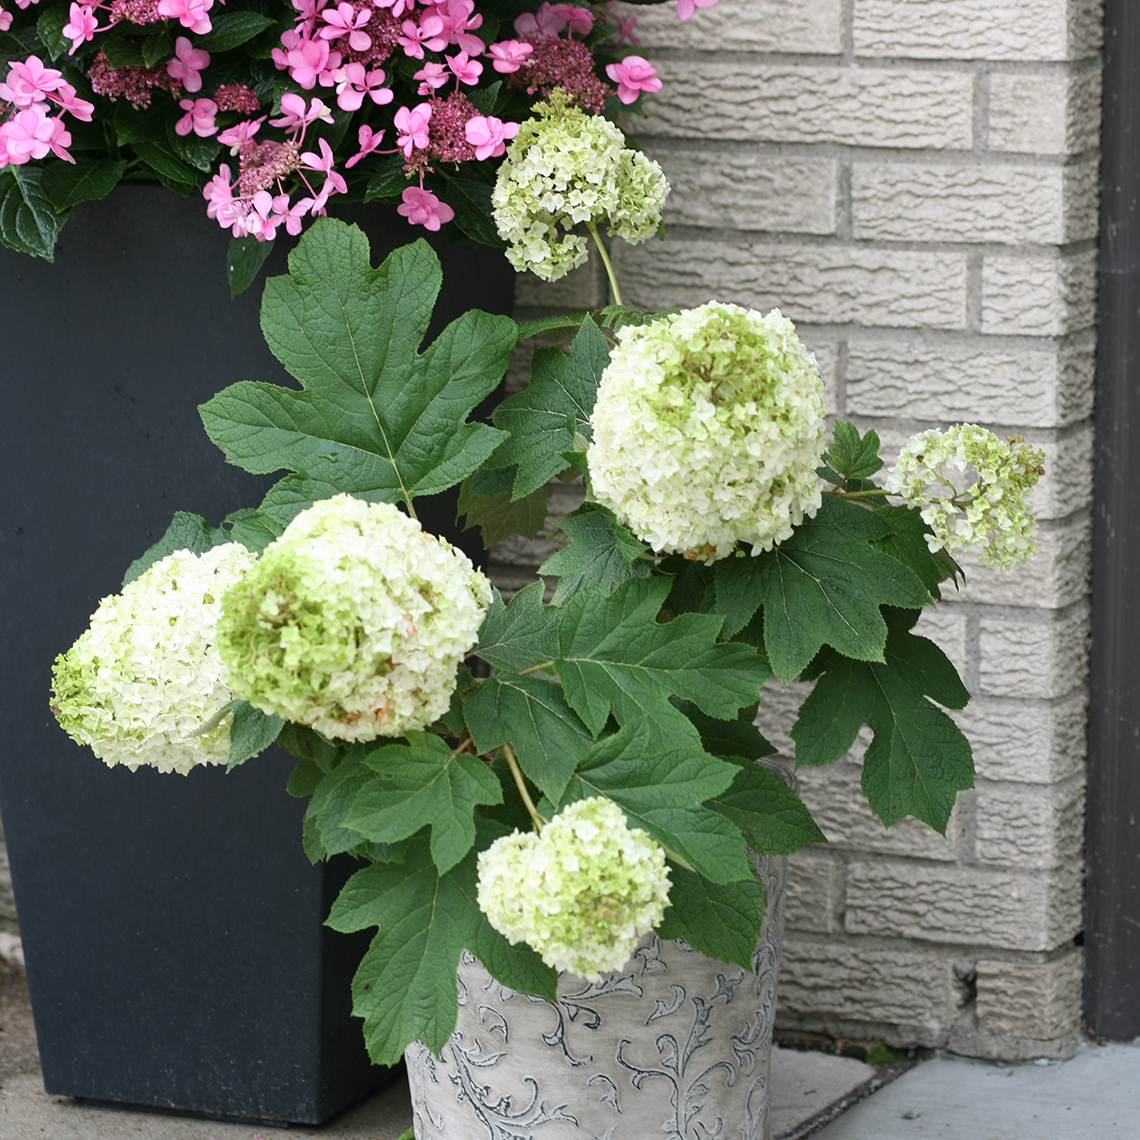 A small specimen of Gatsby Moon oakleaf hydrangea in a decorative container in front of a brick home